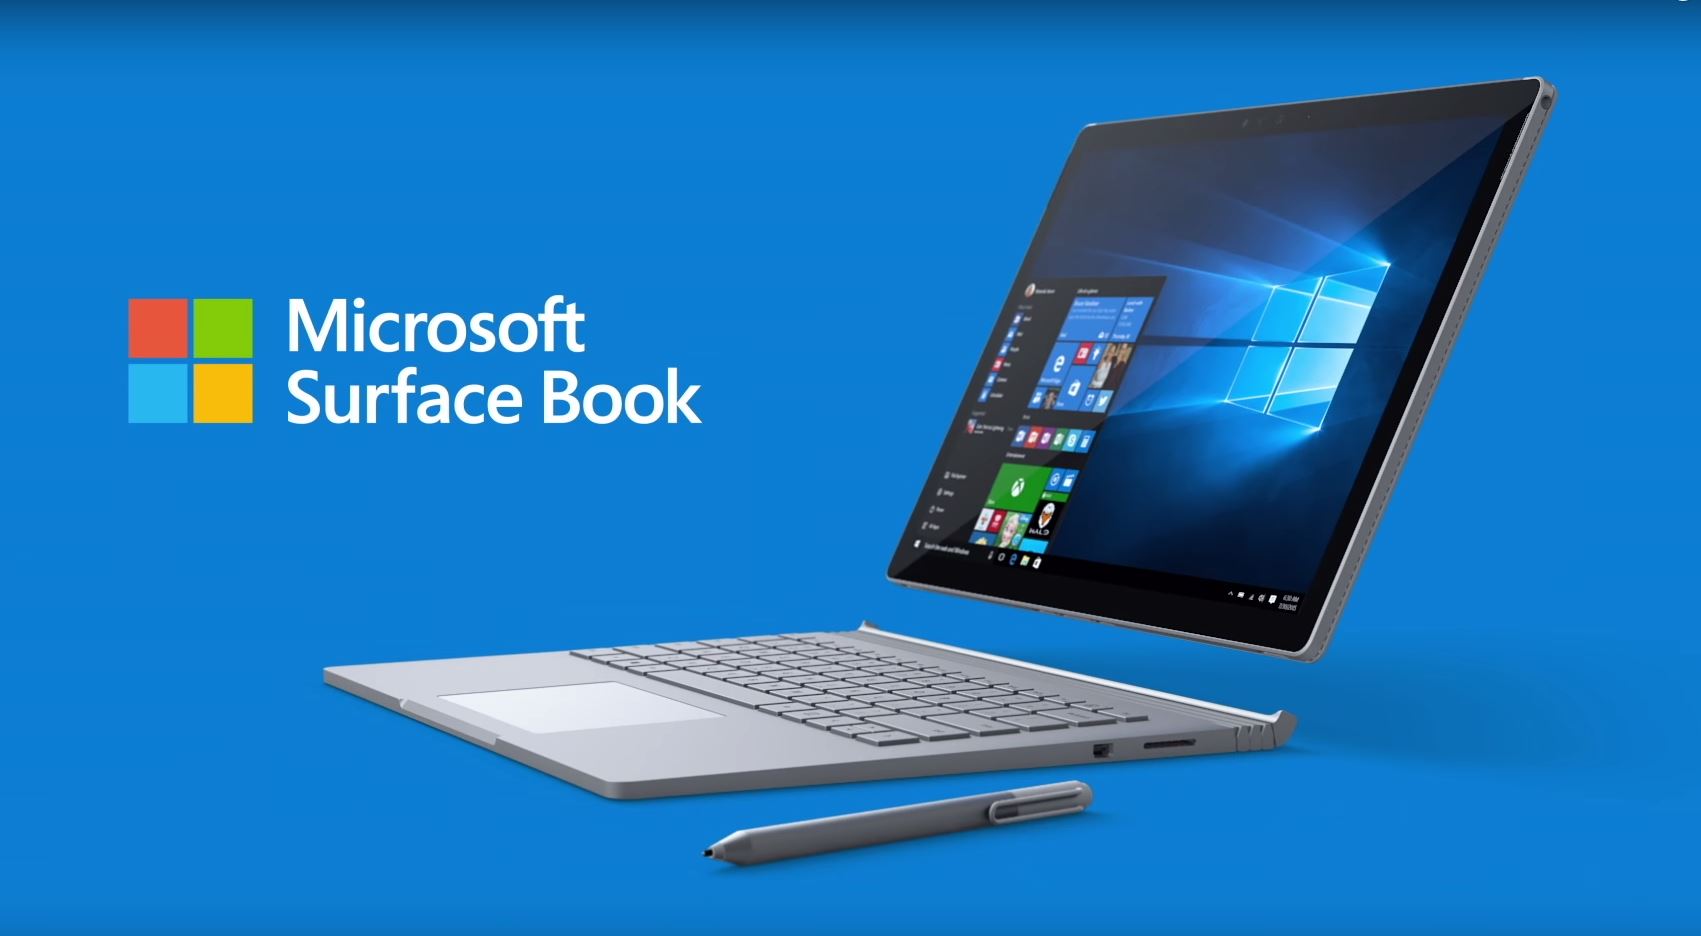 Microsoft Launches Surface Book and Surface Pro 4